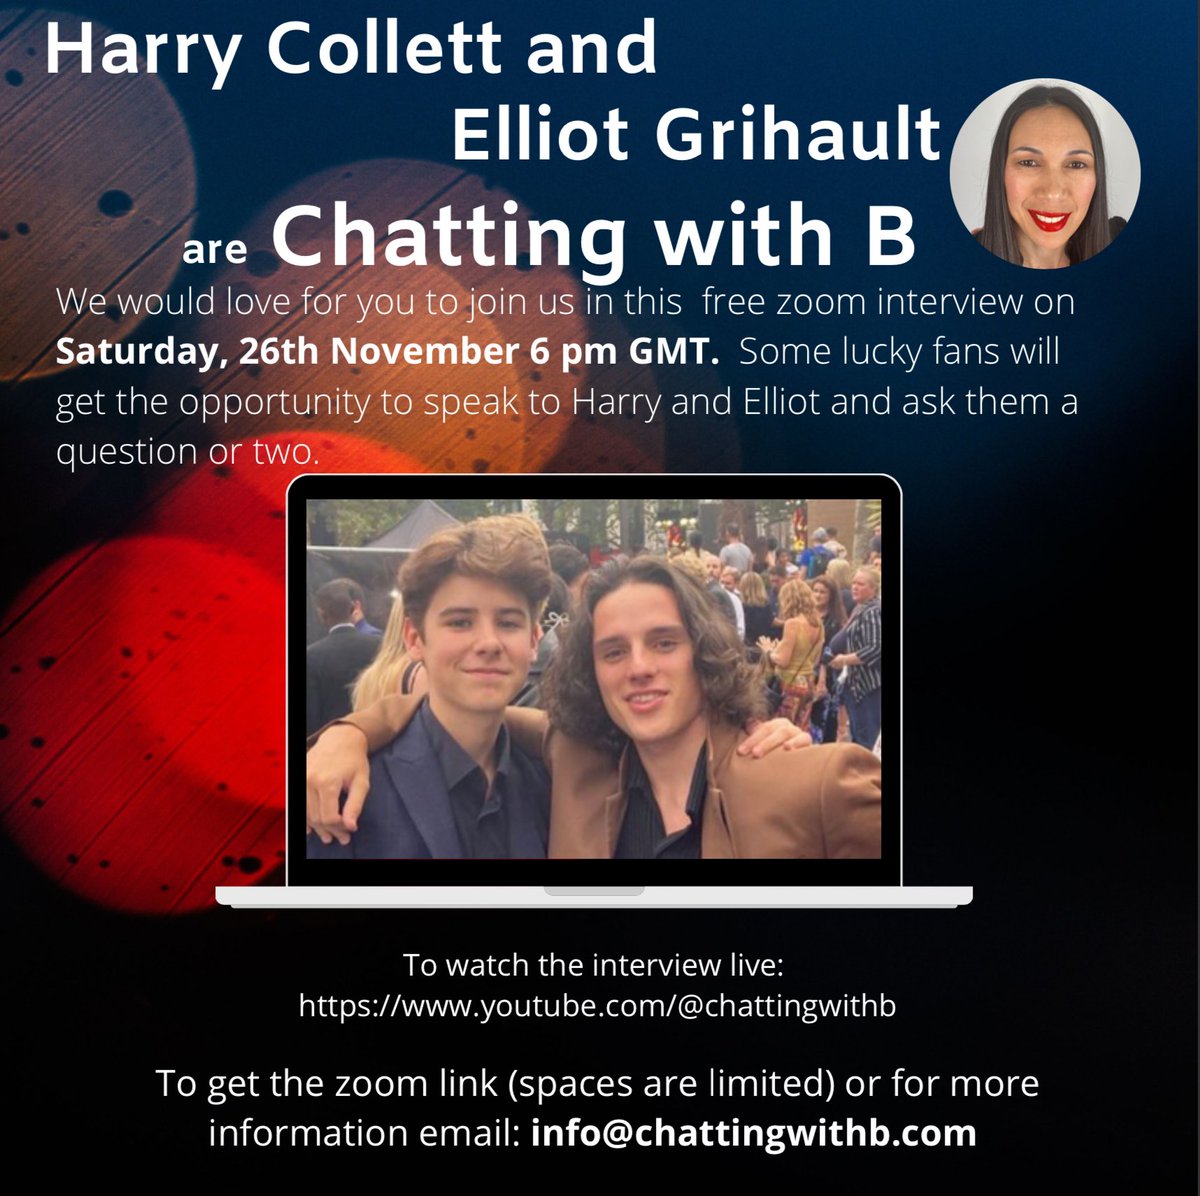 So this interview is happening and I'm really excited! Come join us! @HarryCollett04 and Elliot play the brothers on #HouseOfTheDragonHBO